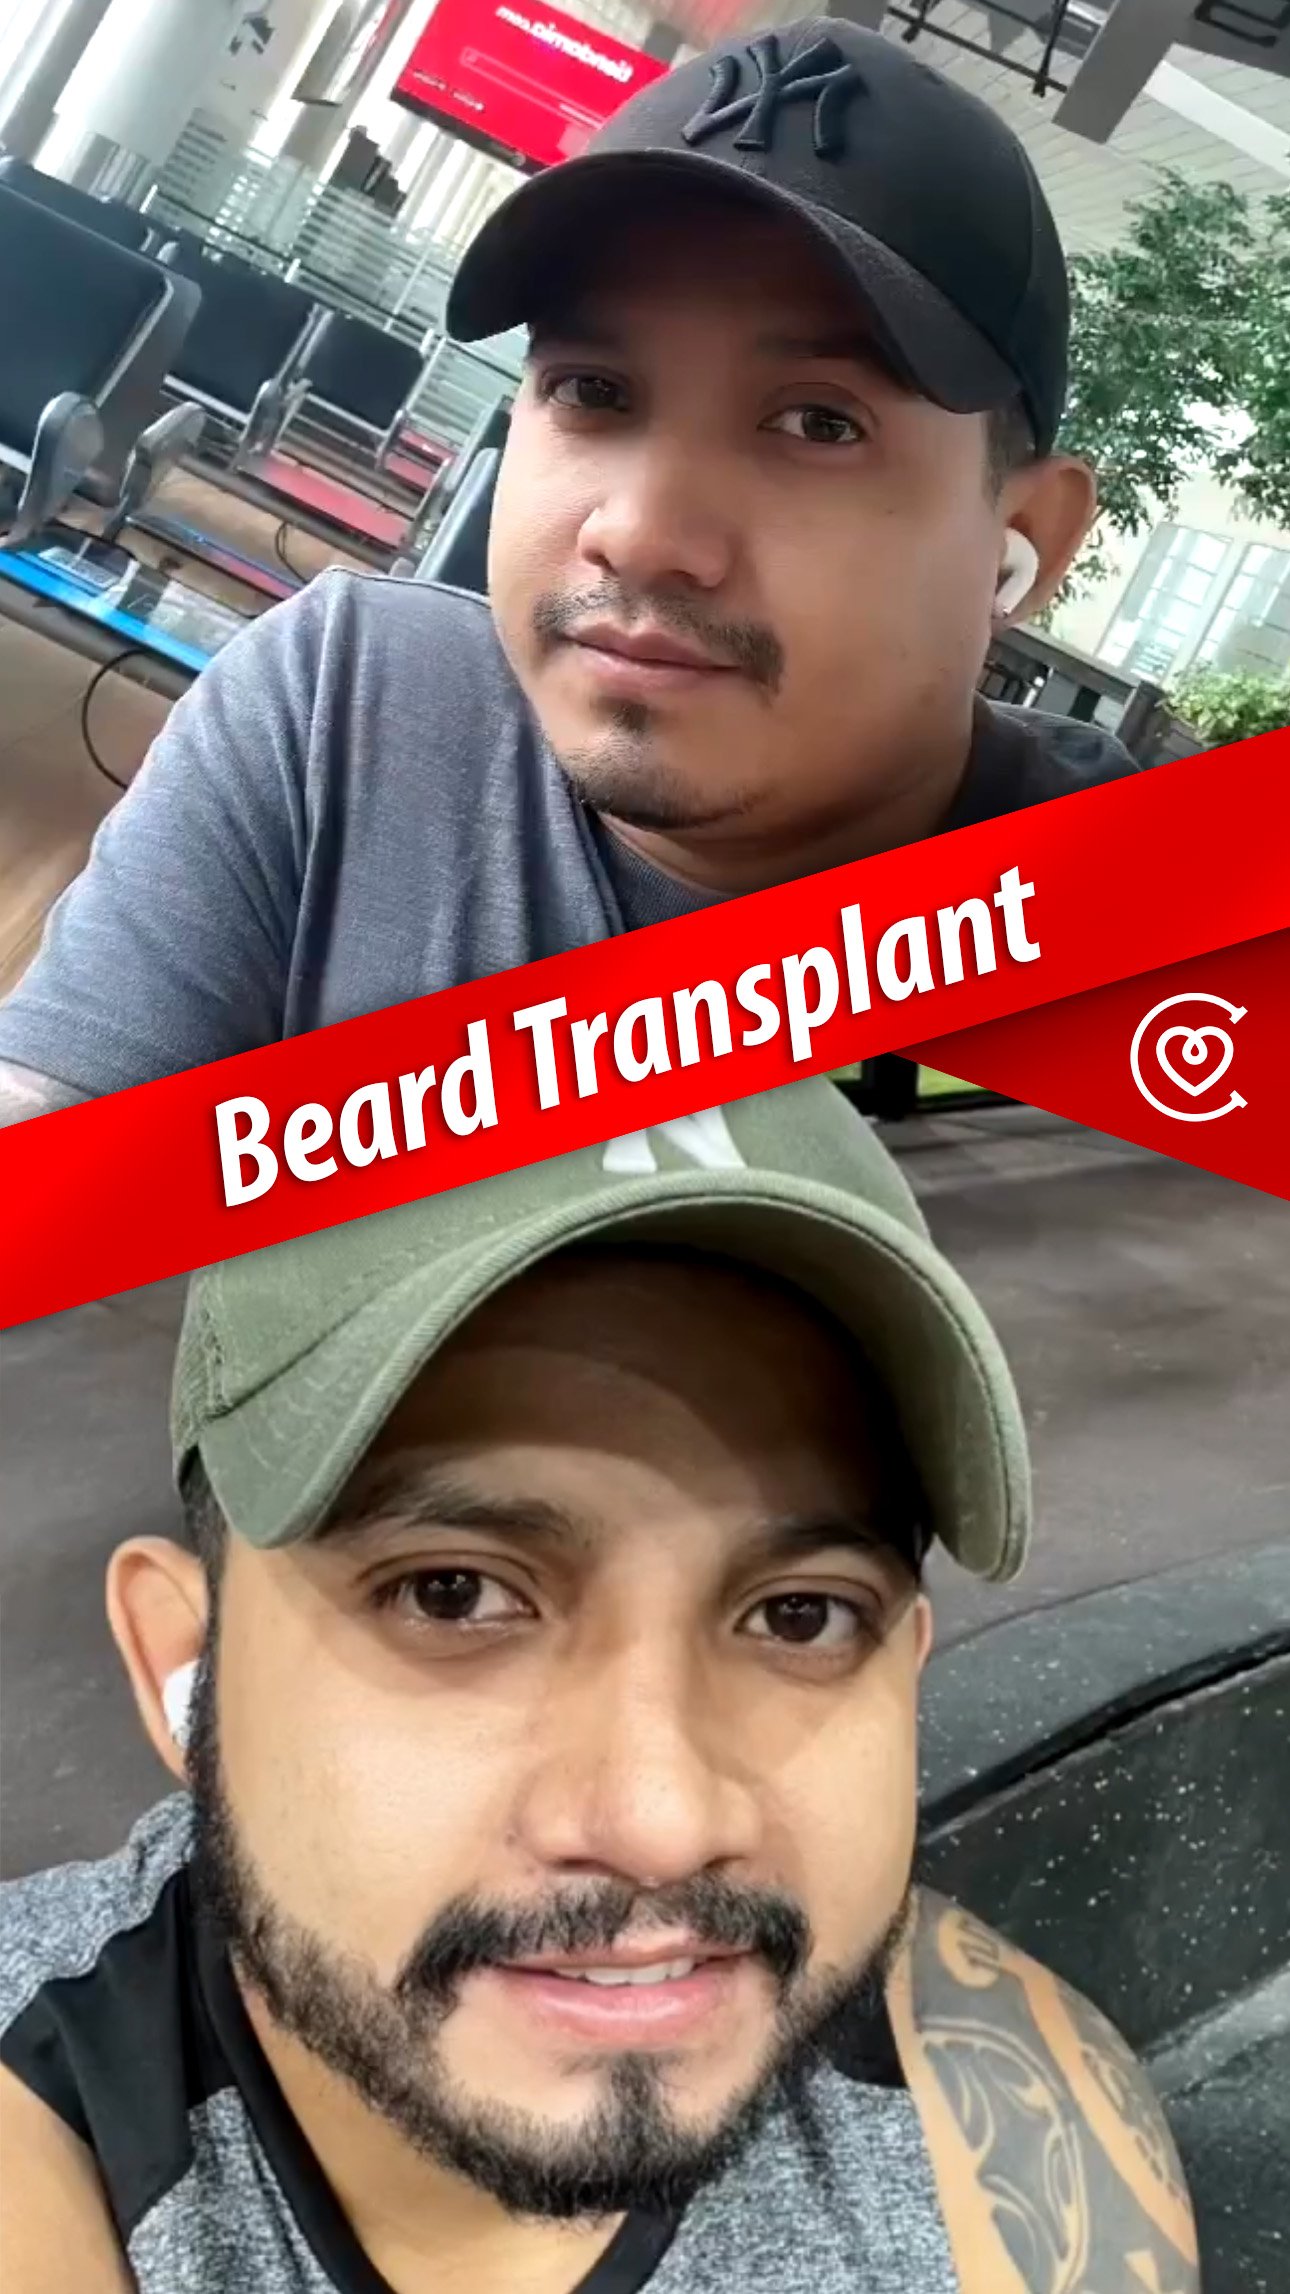 Beard transplant Before and after